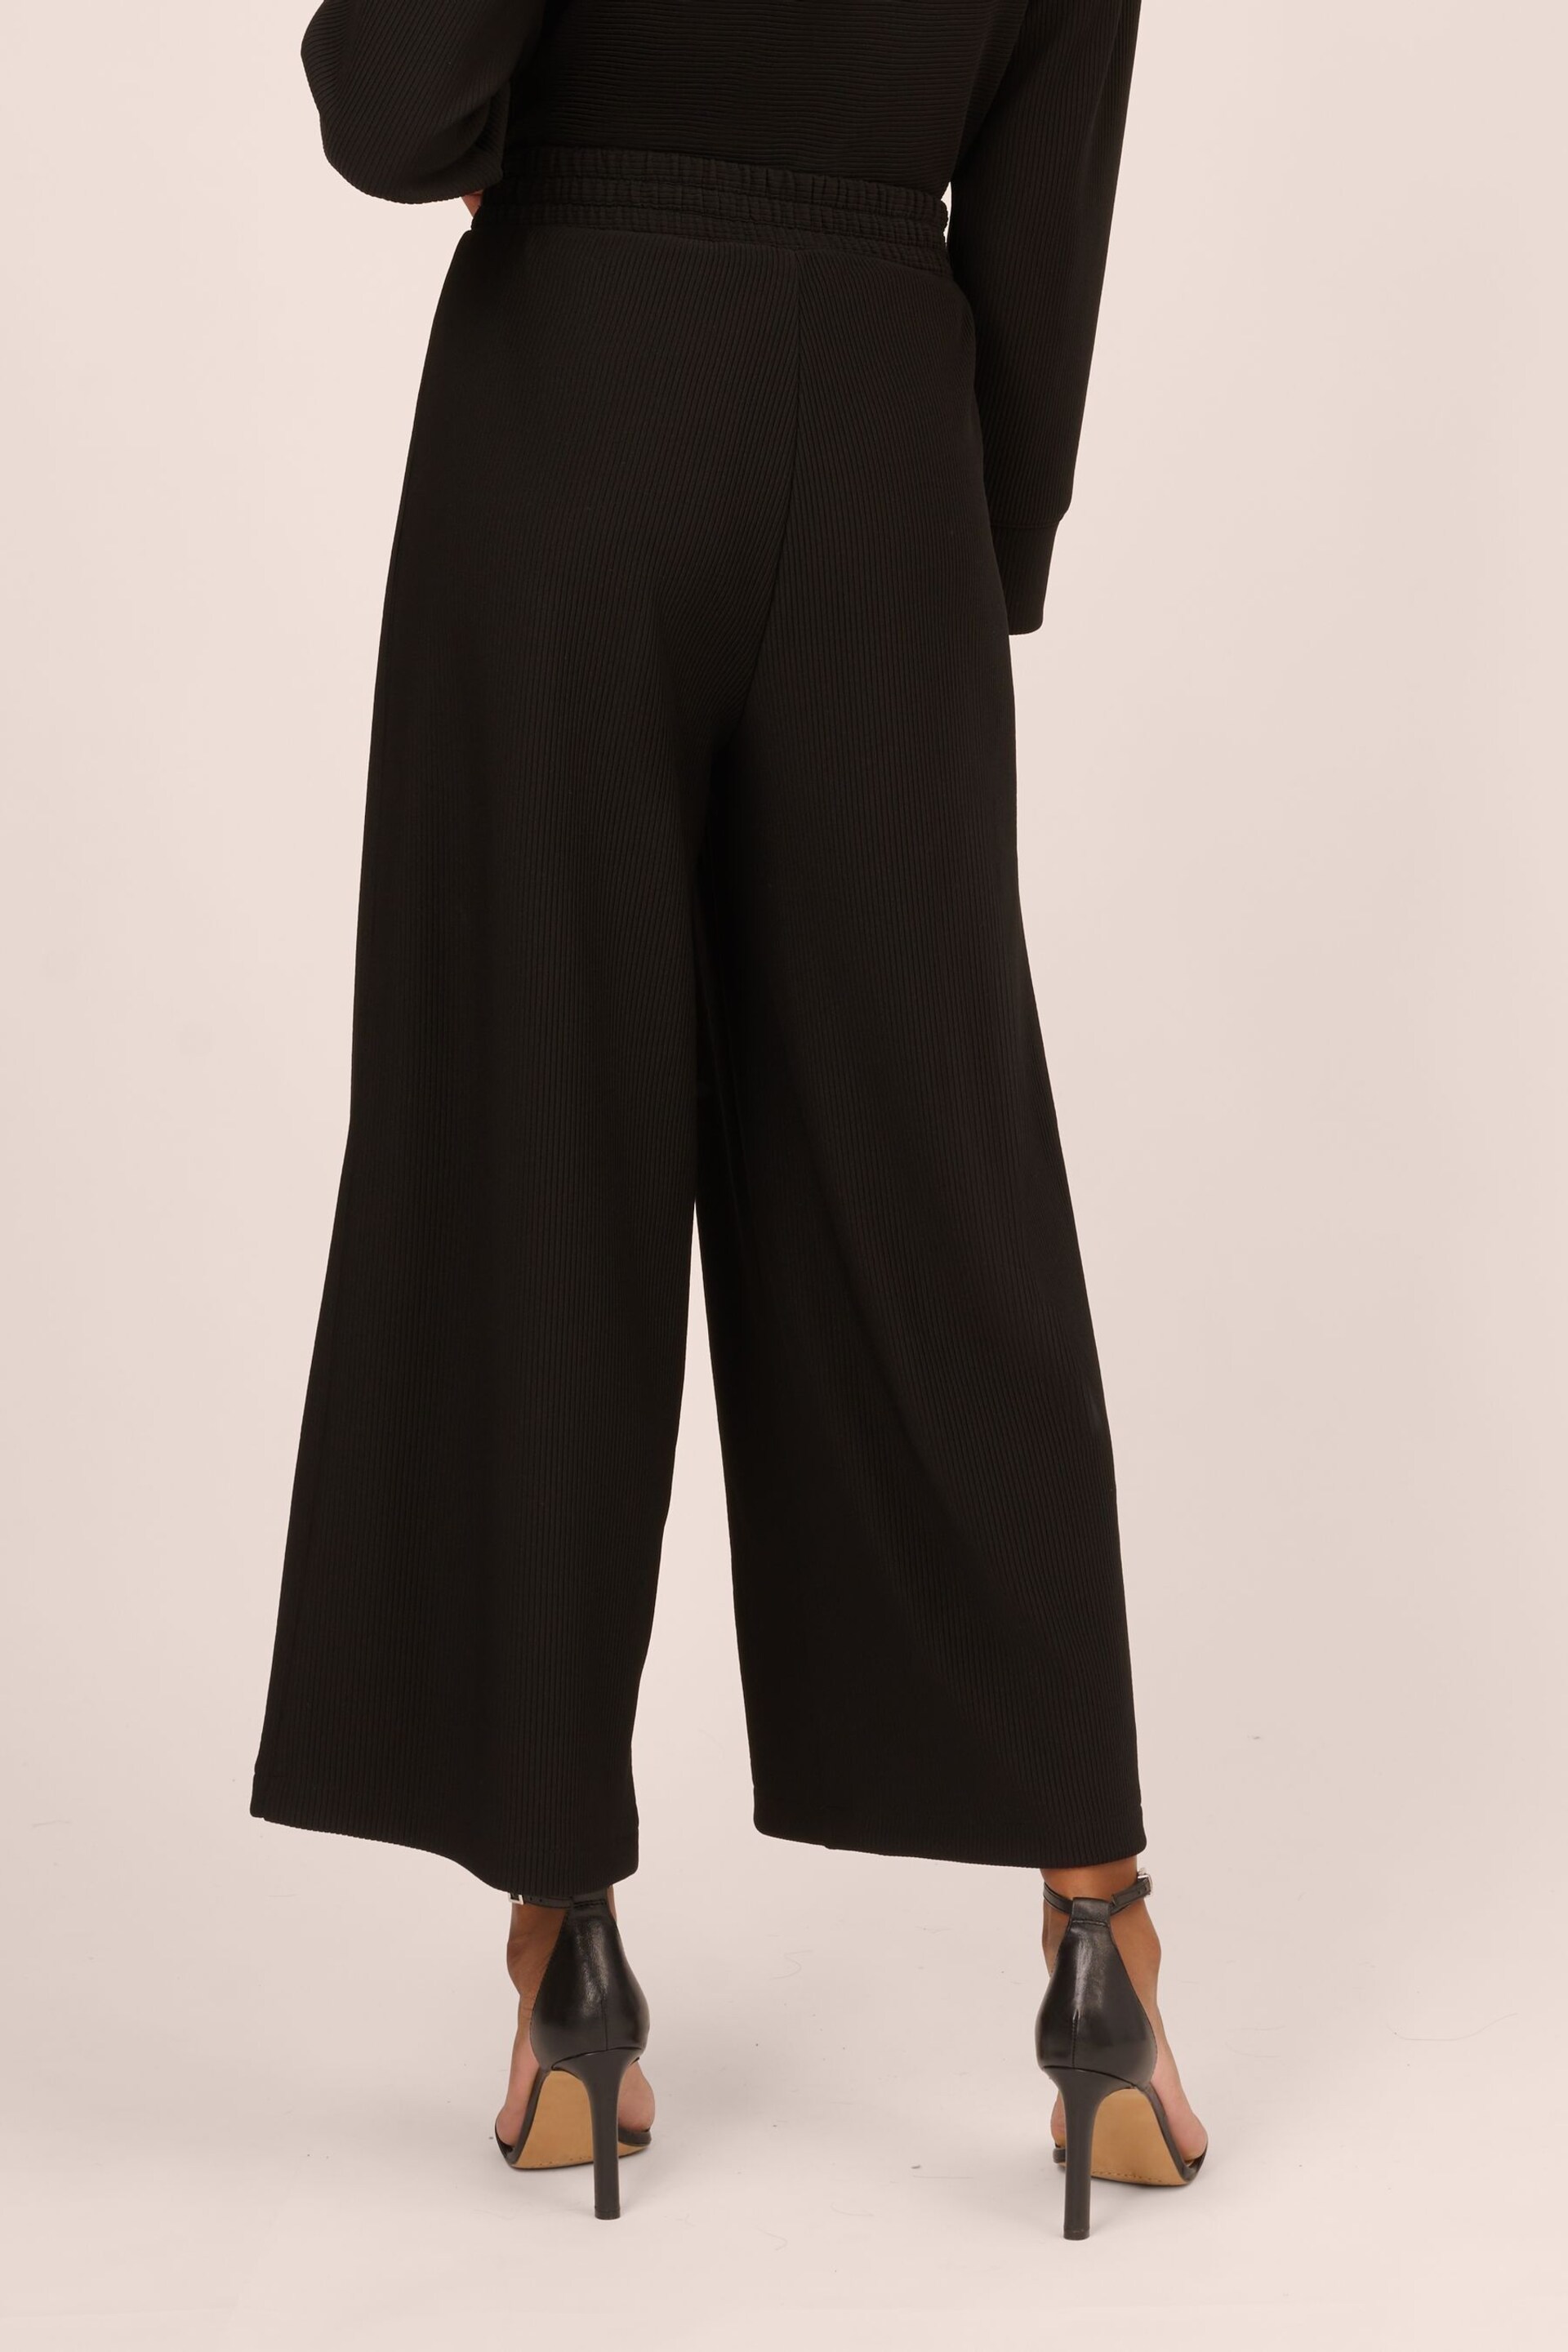 Adrianna Papell Ottoman Rib Knit Pull On Black Trousers - Image 2 of 7